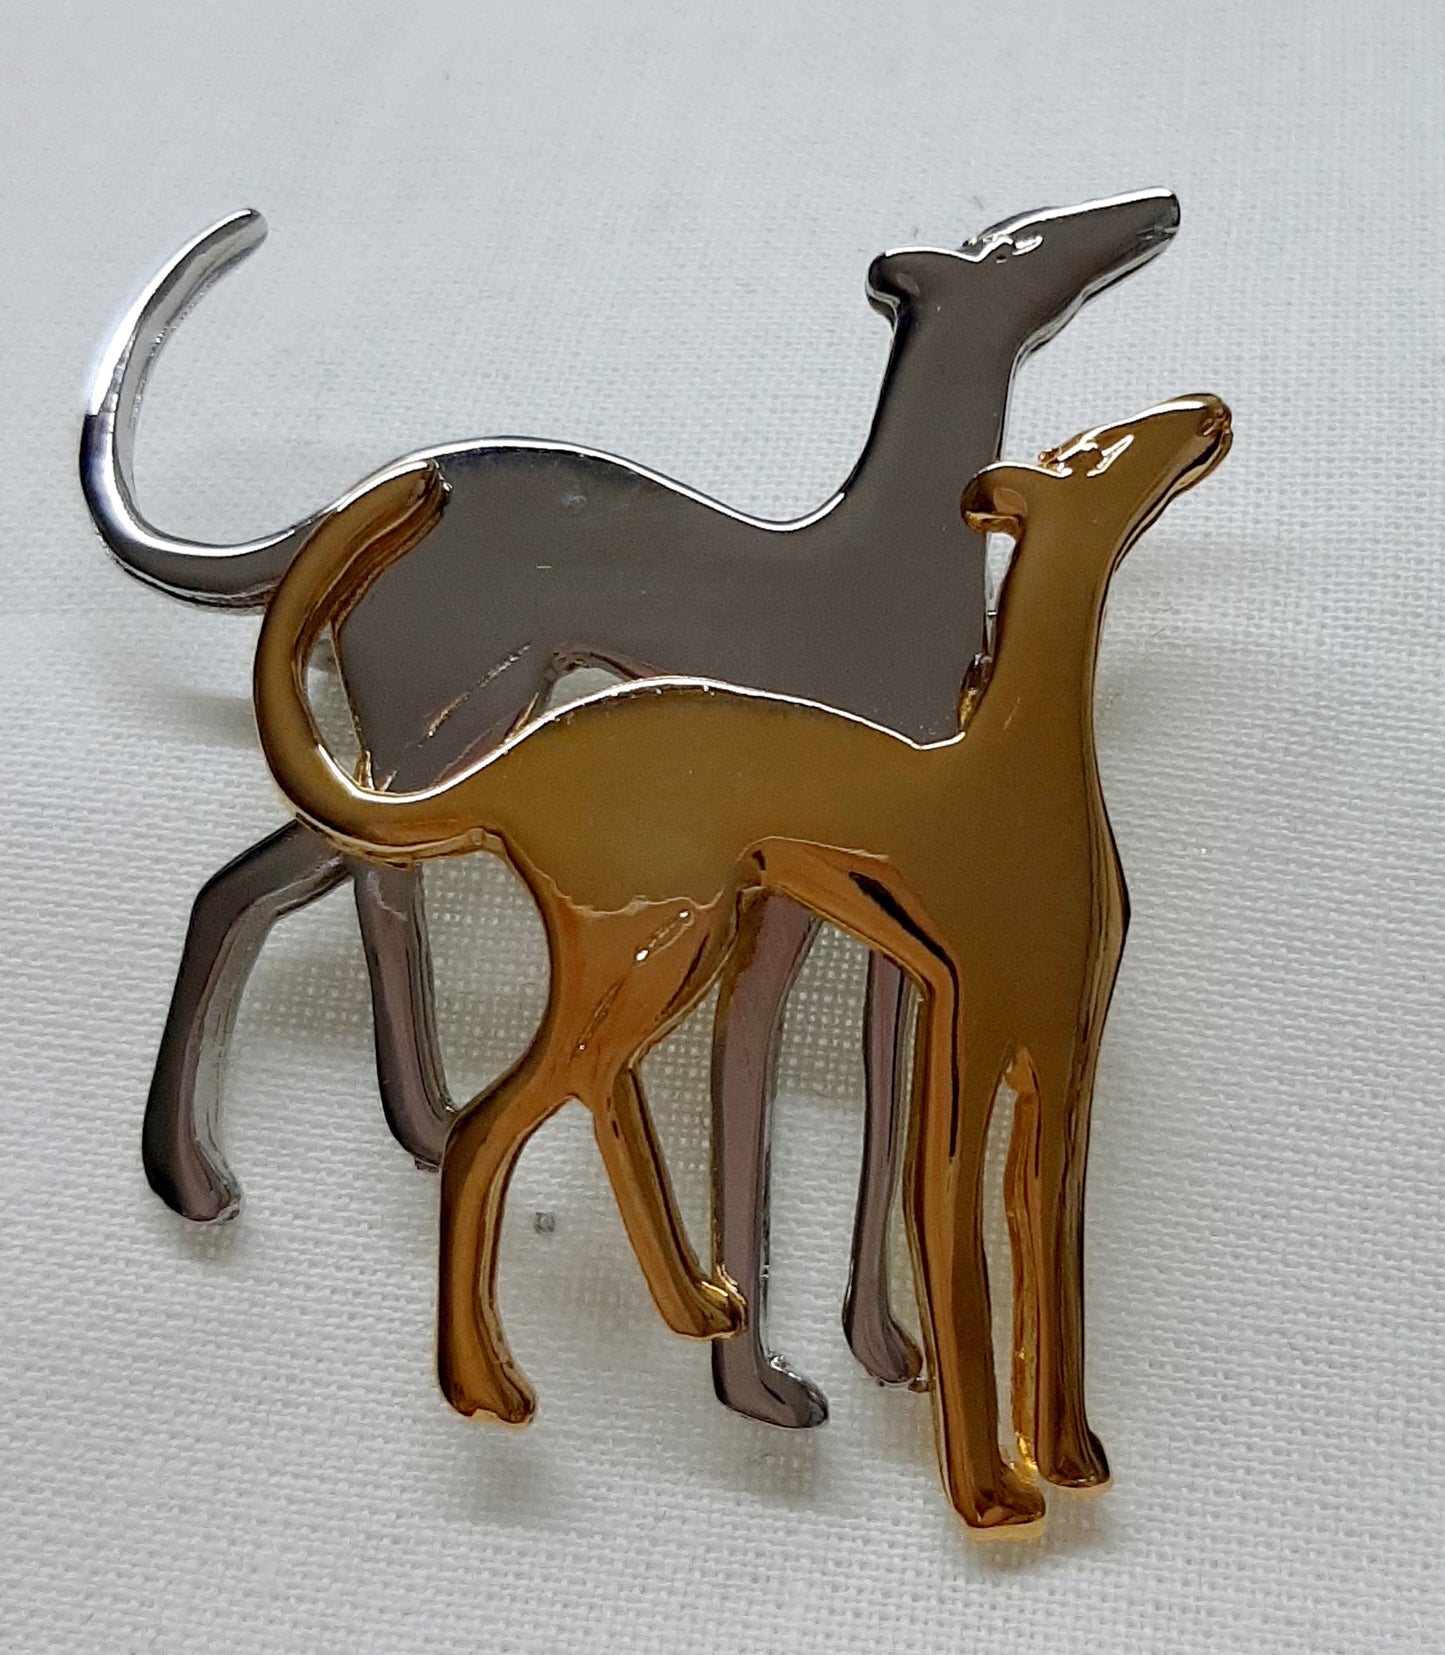 Two Happy Hounds broach/pin